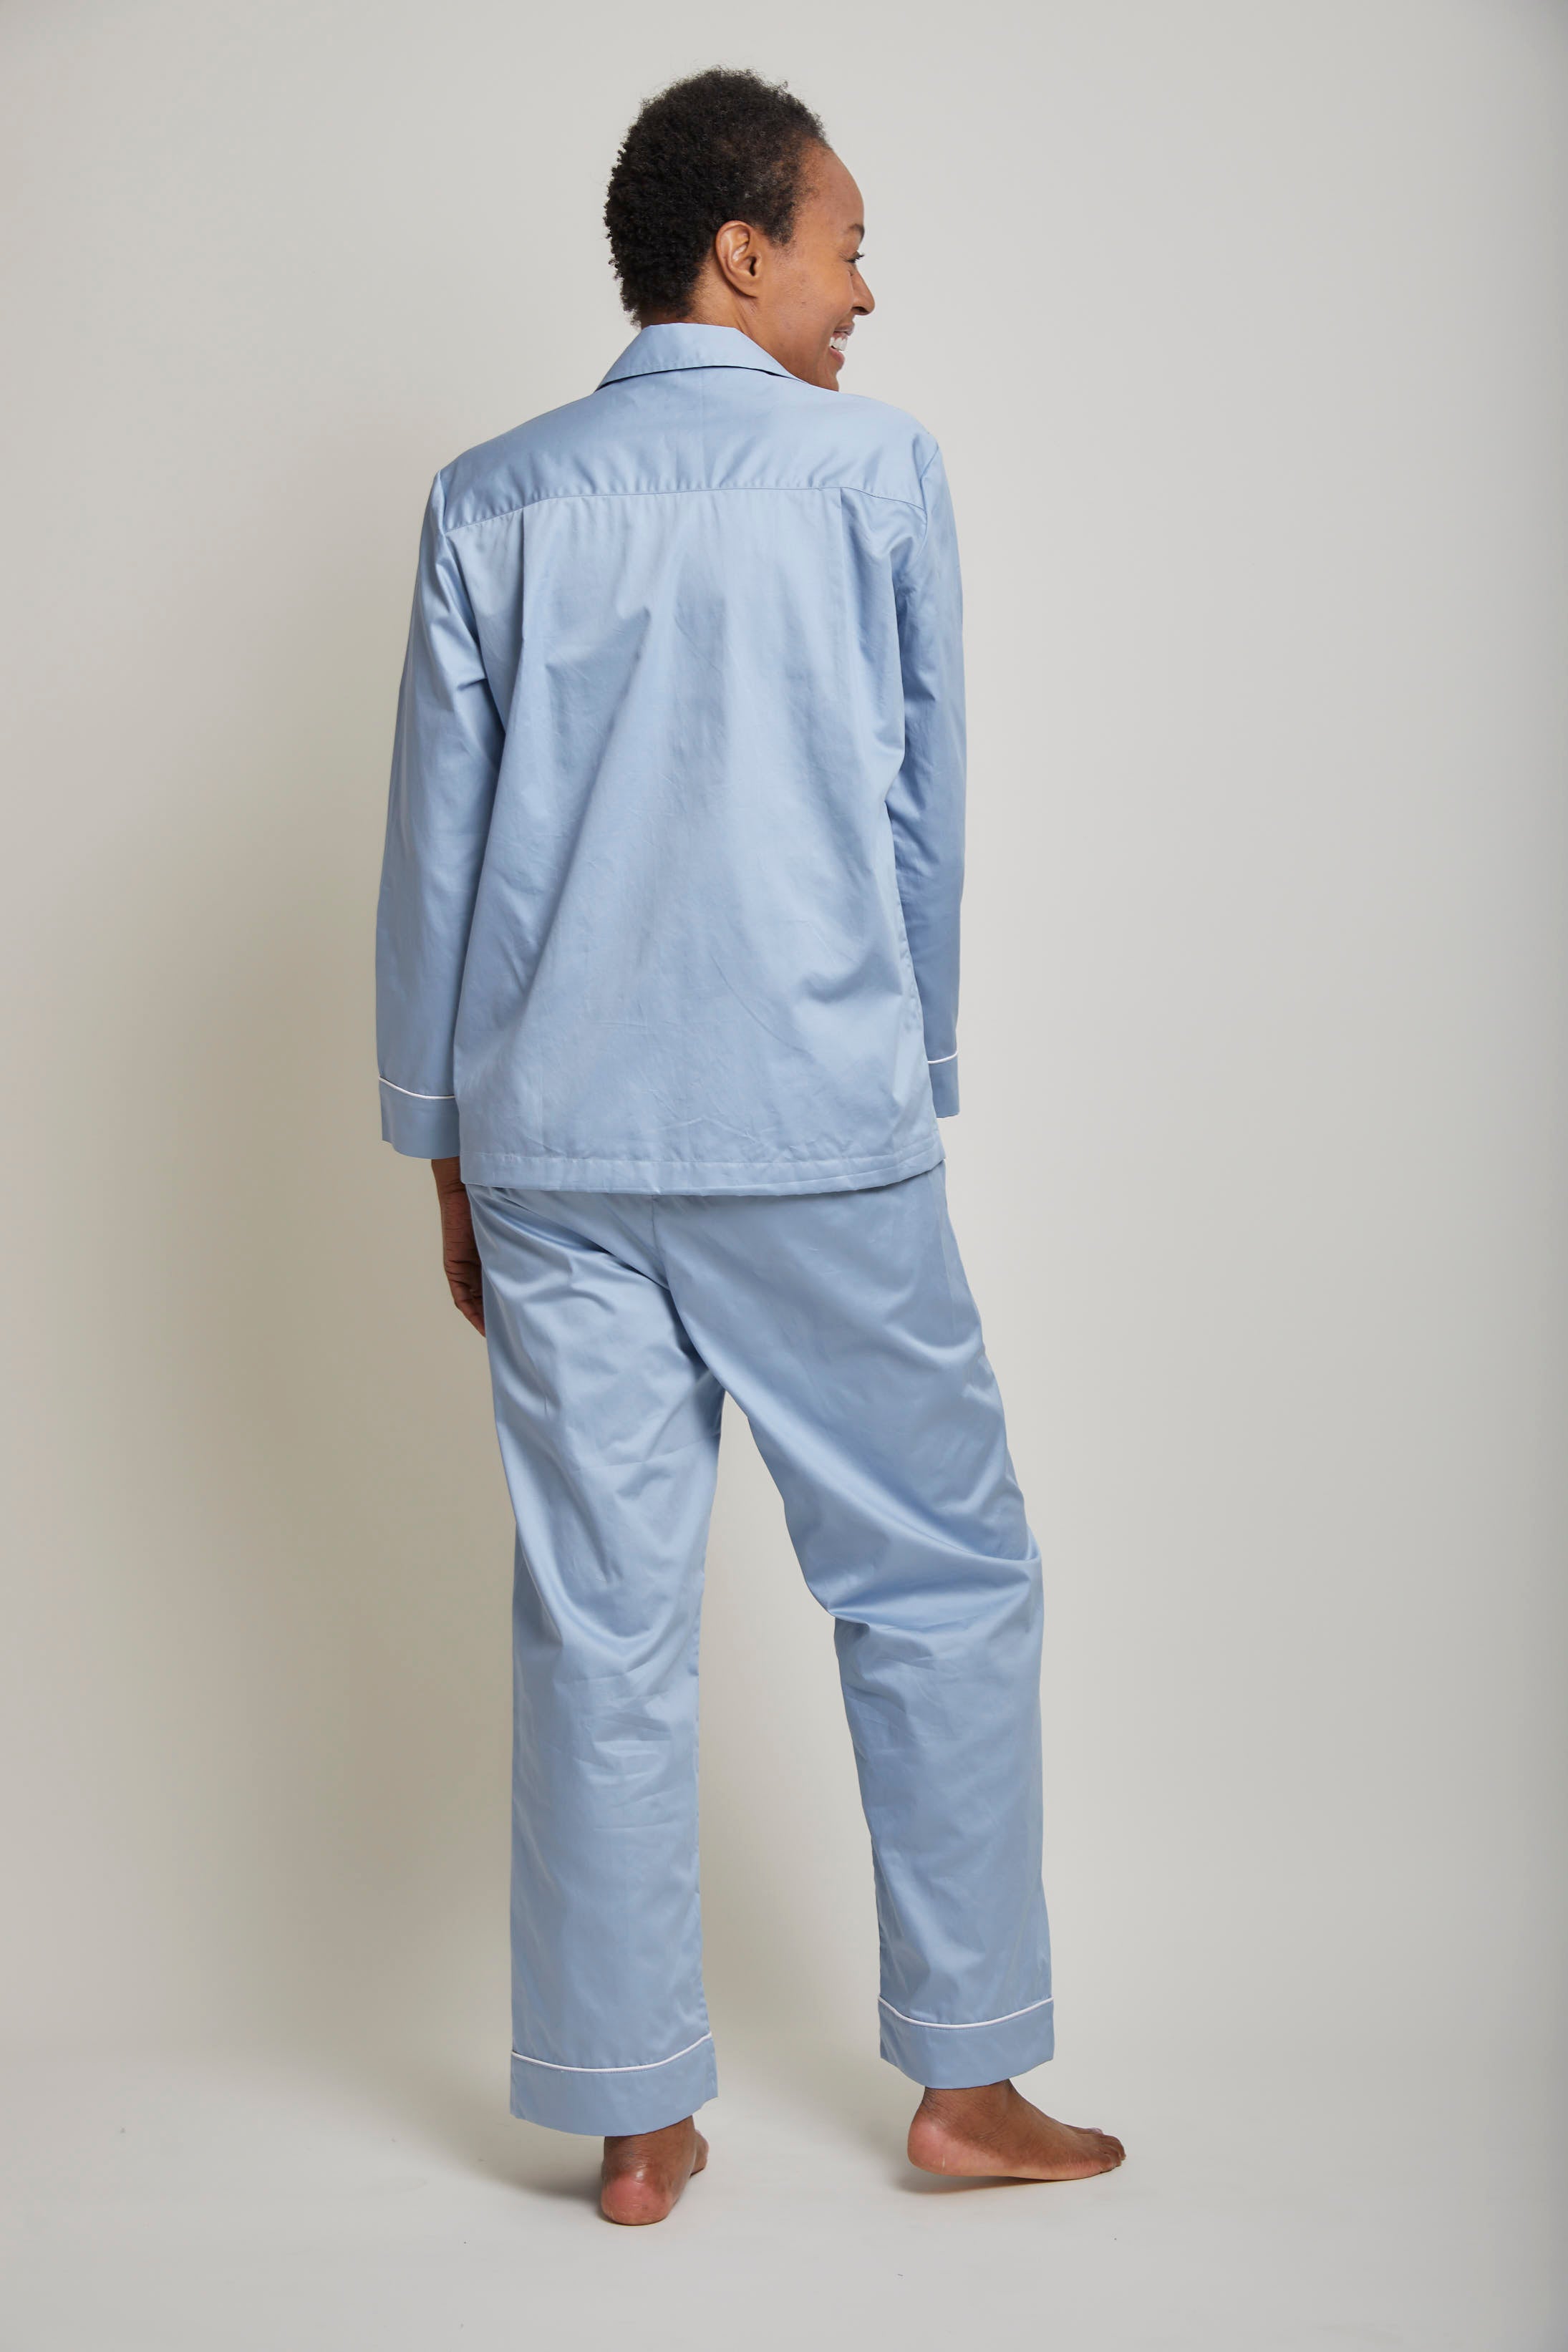 Cotton Sateen Pajama Set with Contrast Piping- Captain's Blue